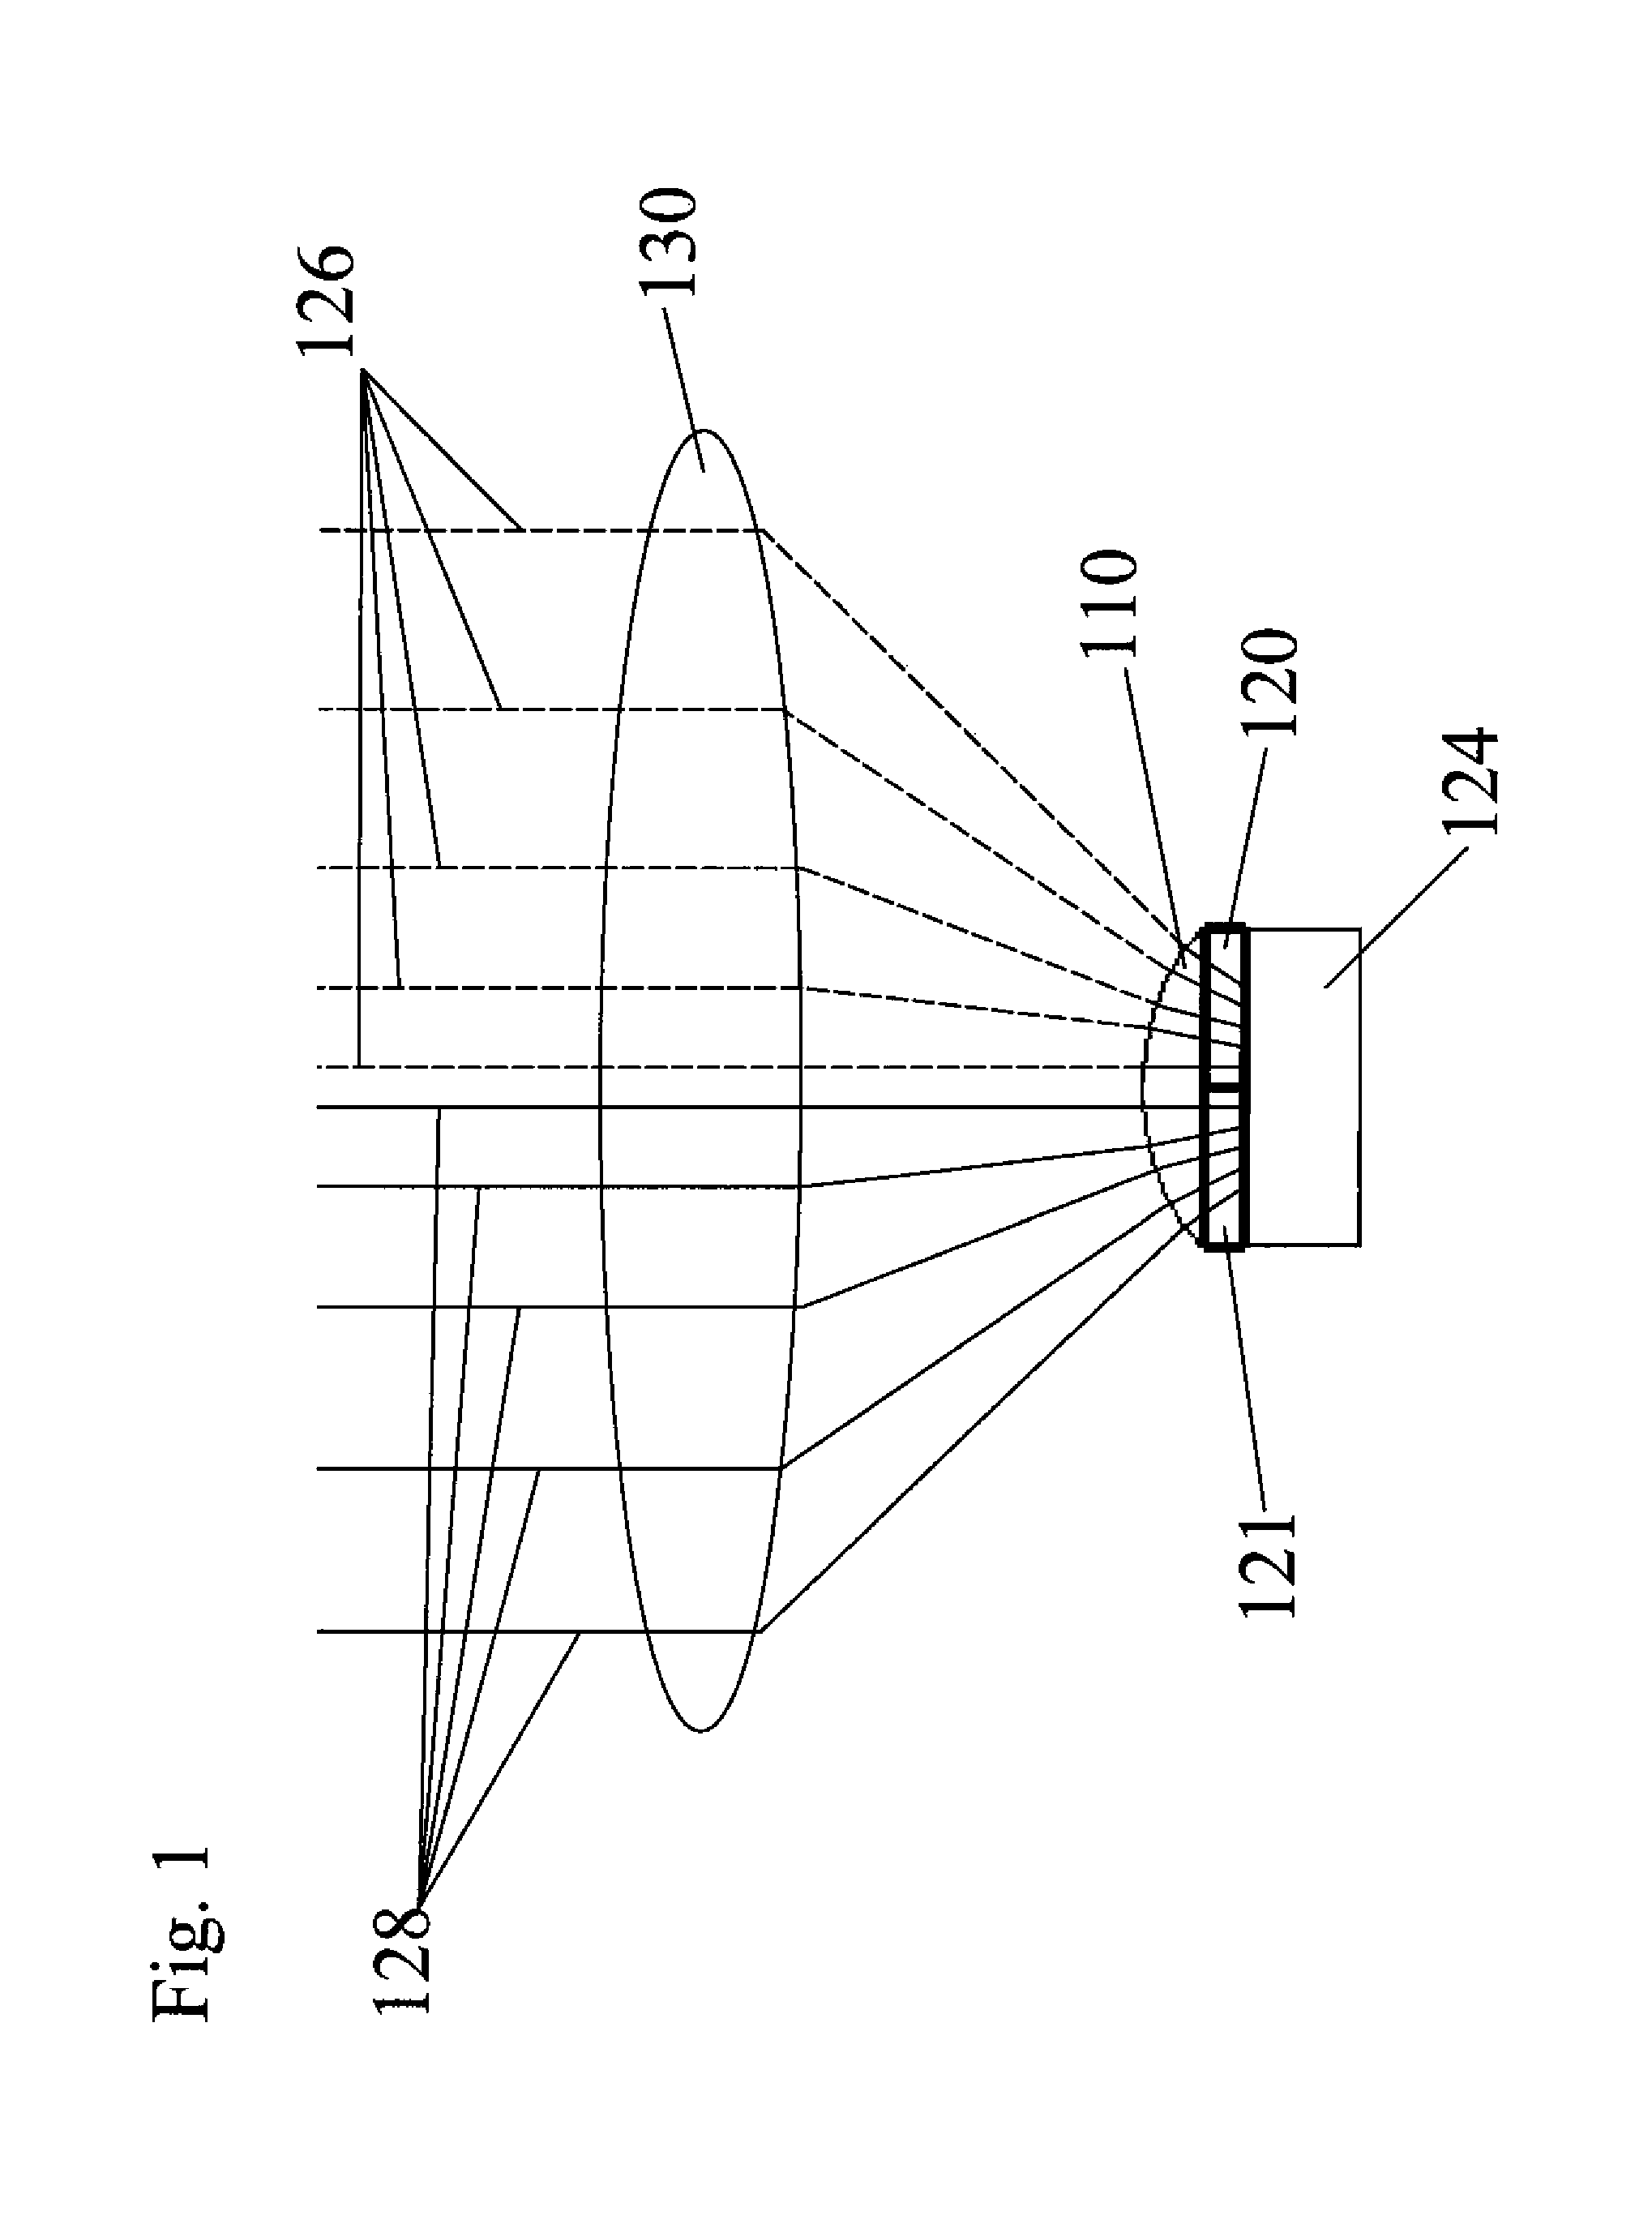 Sensor with multi-perspective image capture